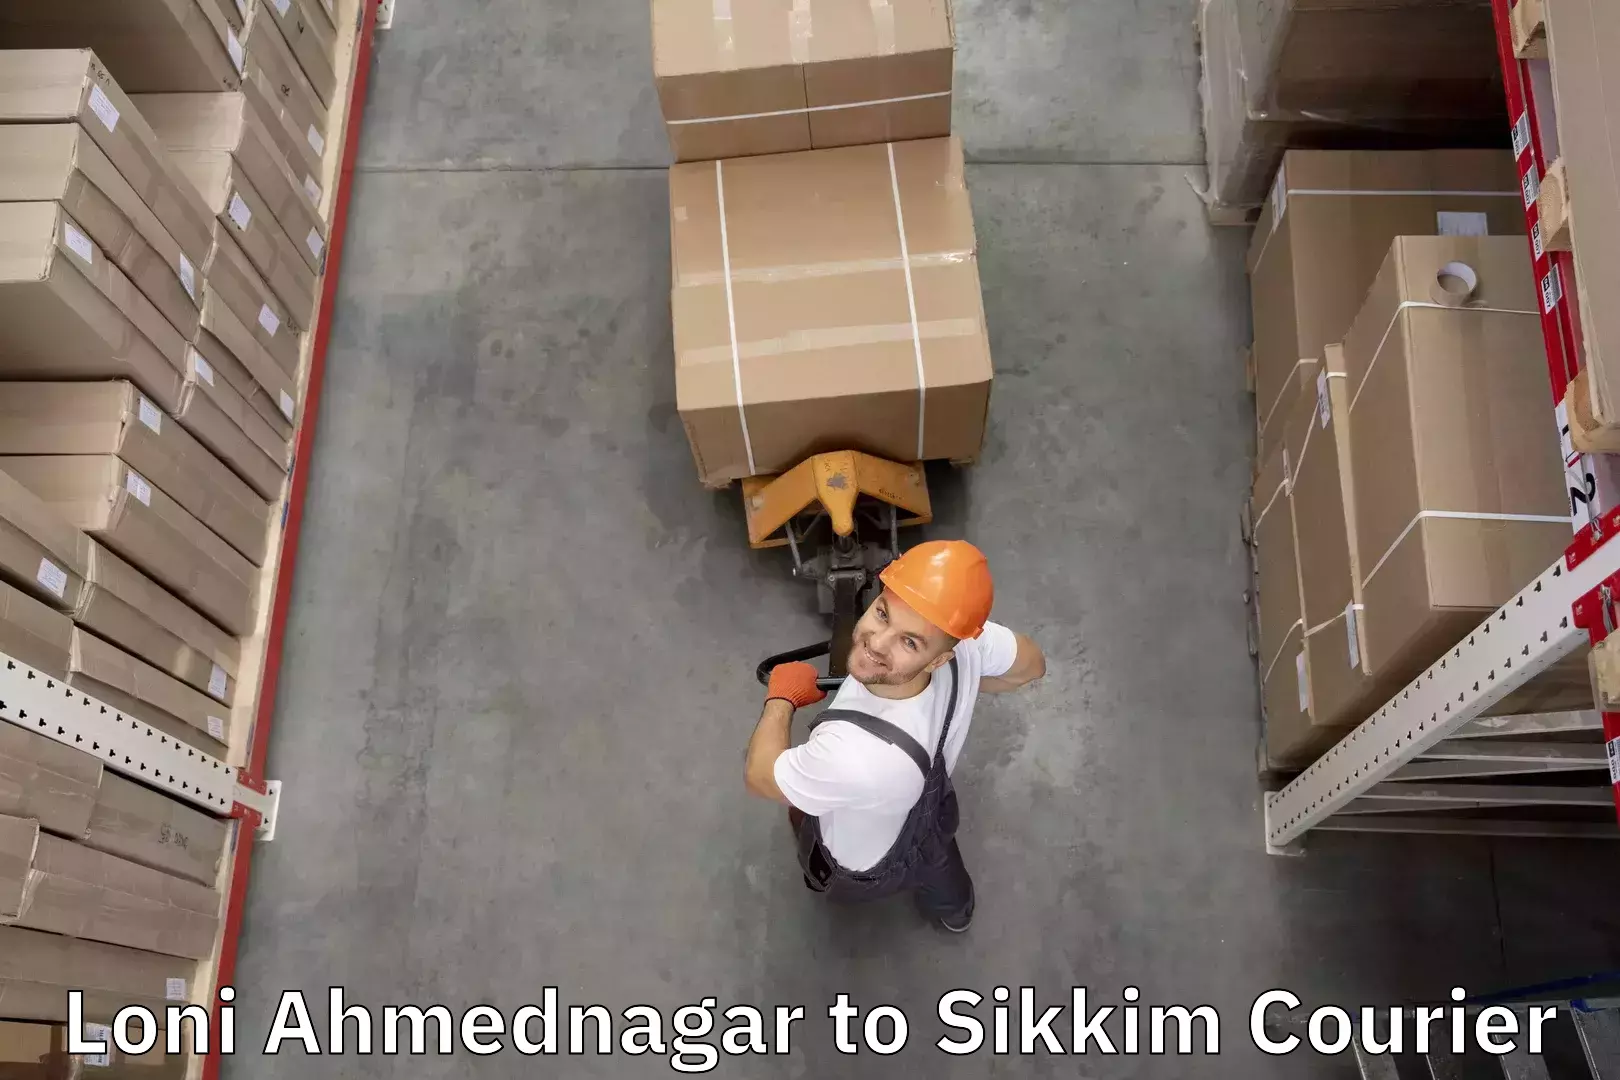 Luggage transport consultancy Loni Ahmednagar to Sikkim